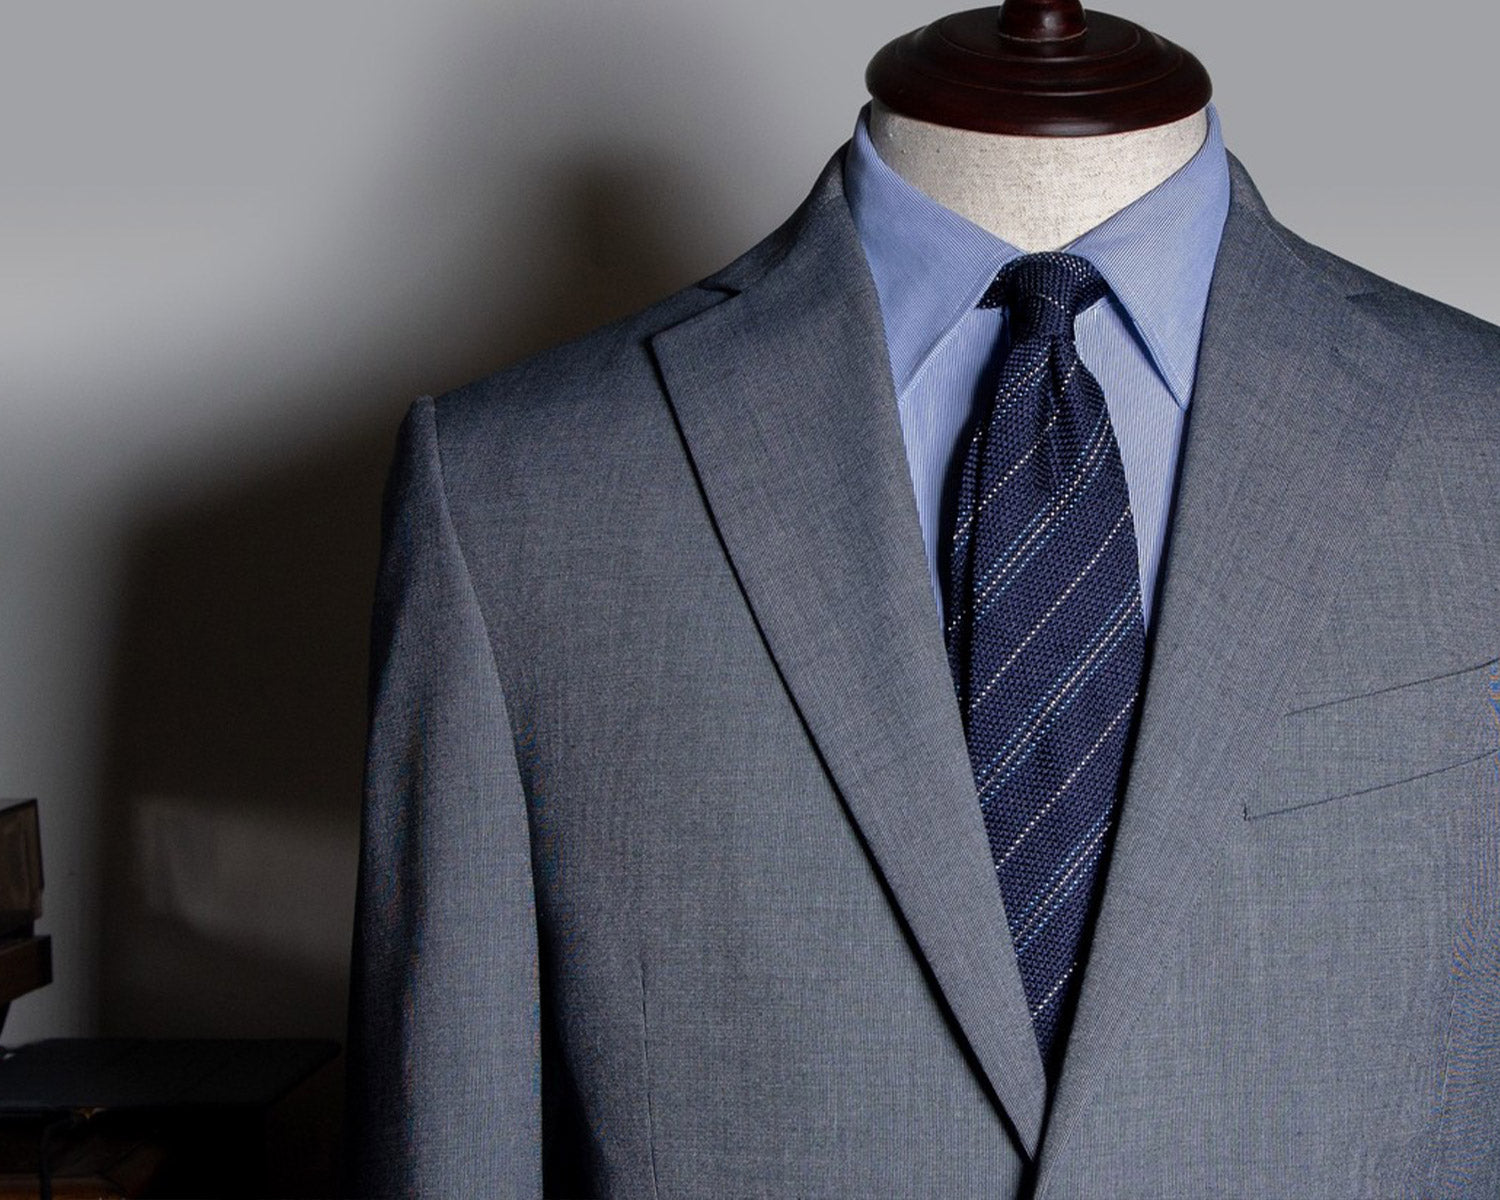 Refining Spring Suits for Men so You're in Full Bloom - Light Grey Suit with Striped Blue Grenadine Tie